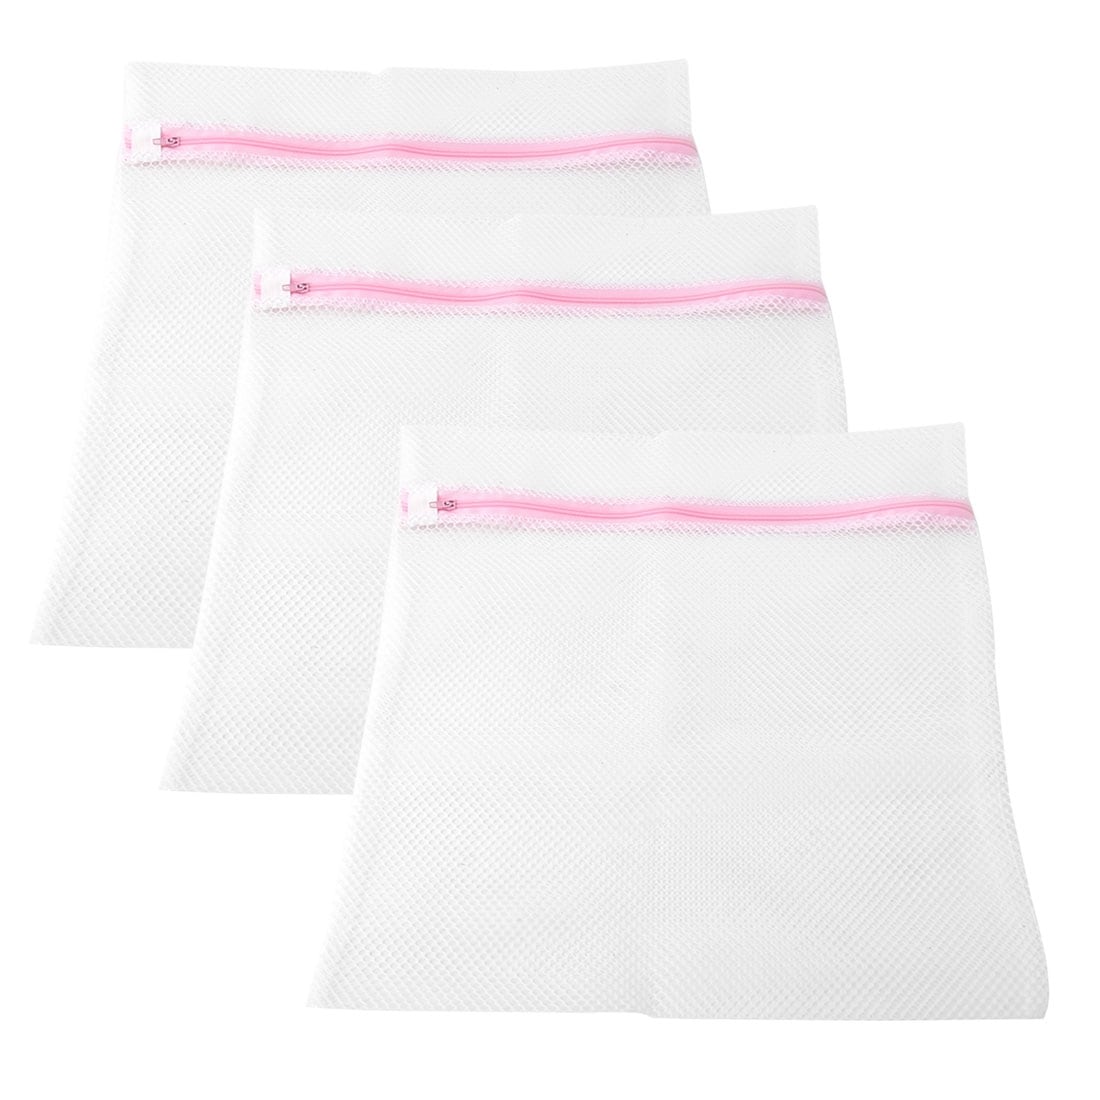 4Pcs Mesh Laundry Bags Washing Machine Mesh Wash Bags for Delicates  Clothes,Underwear,Lingerie, Bed Linings with Drawstring Closure Durable